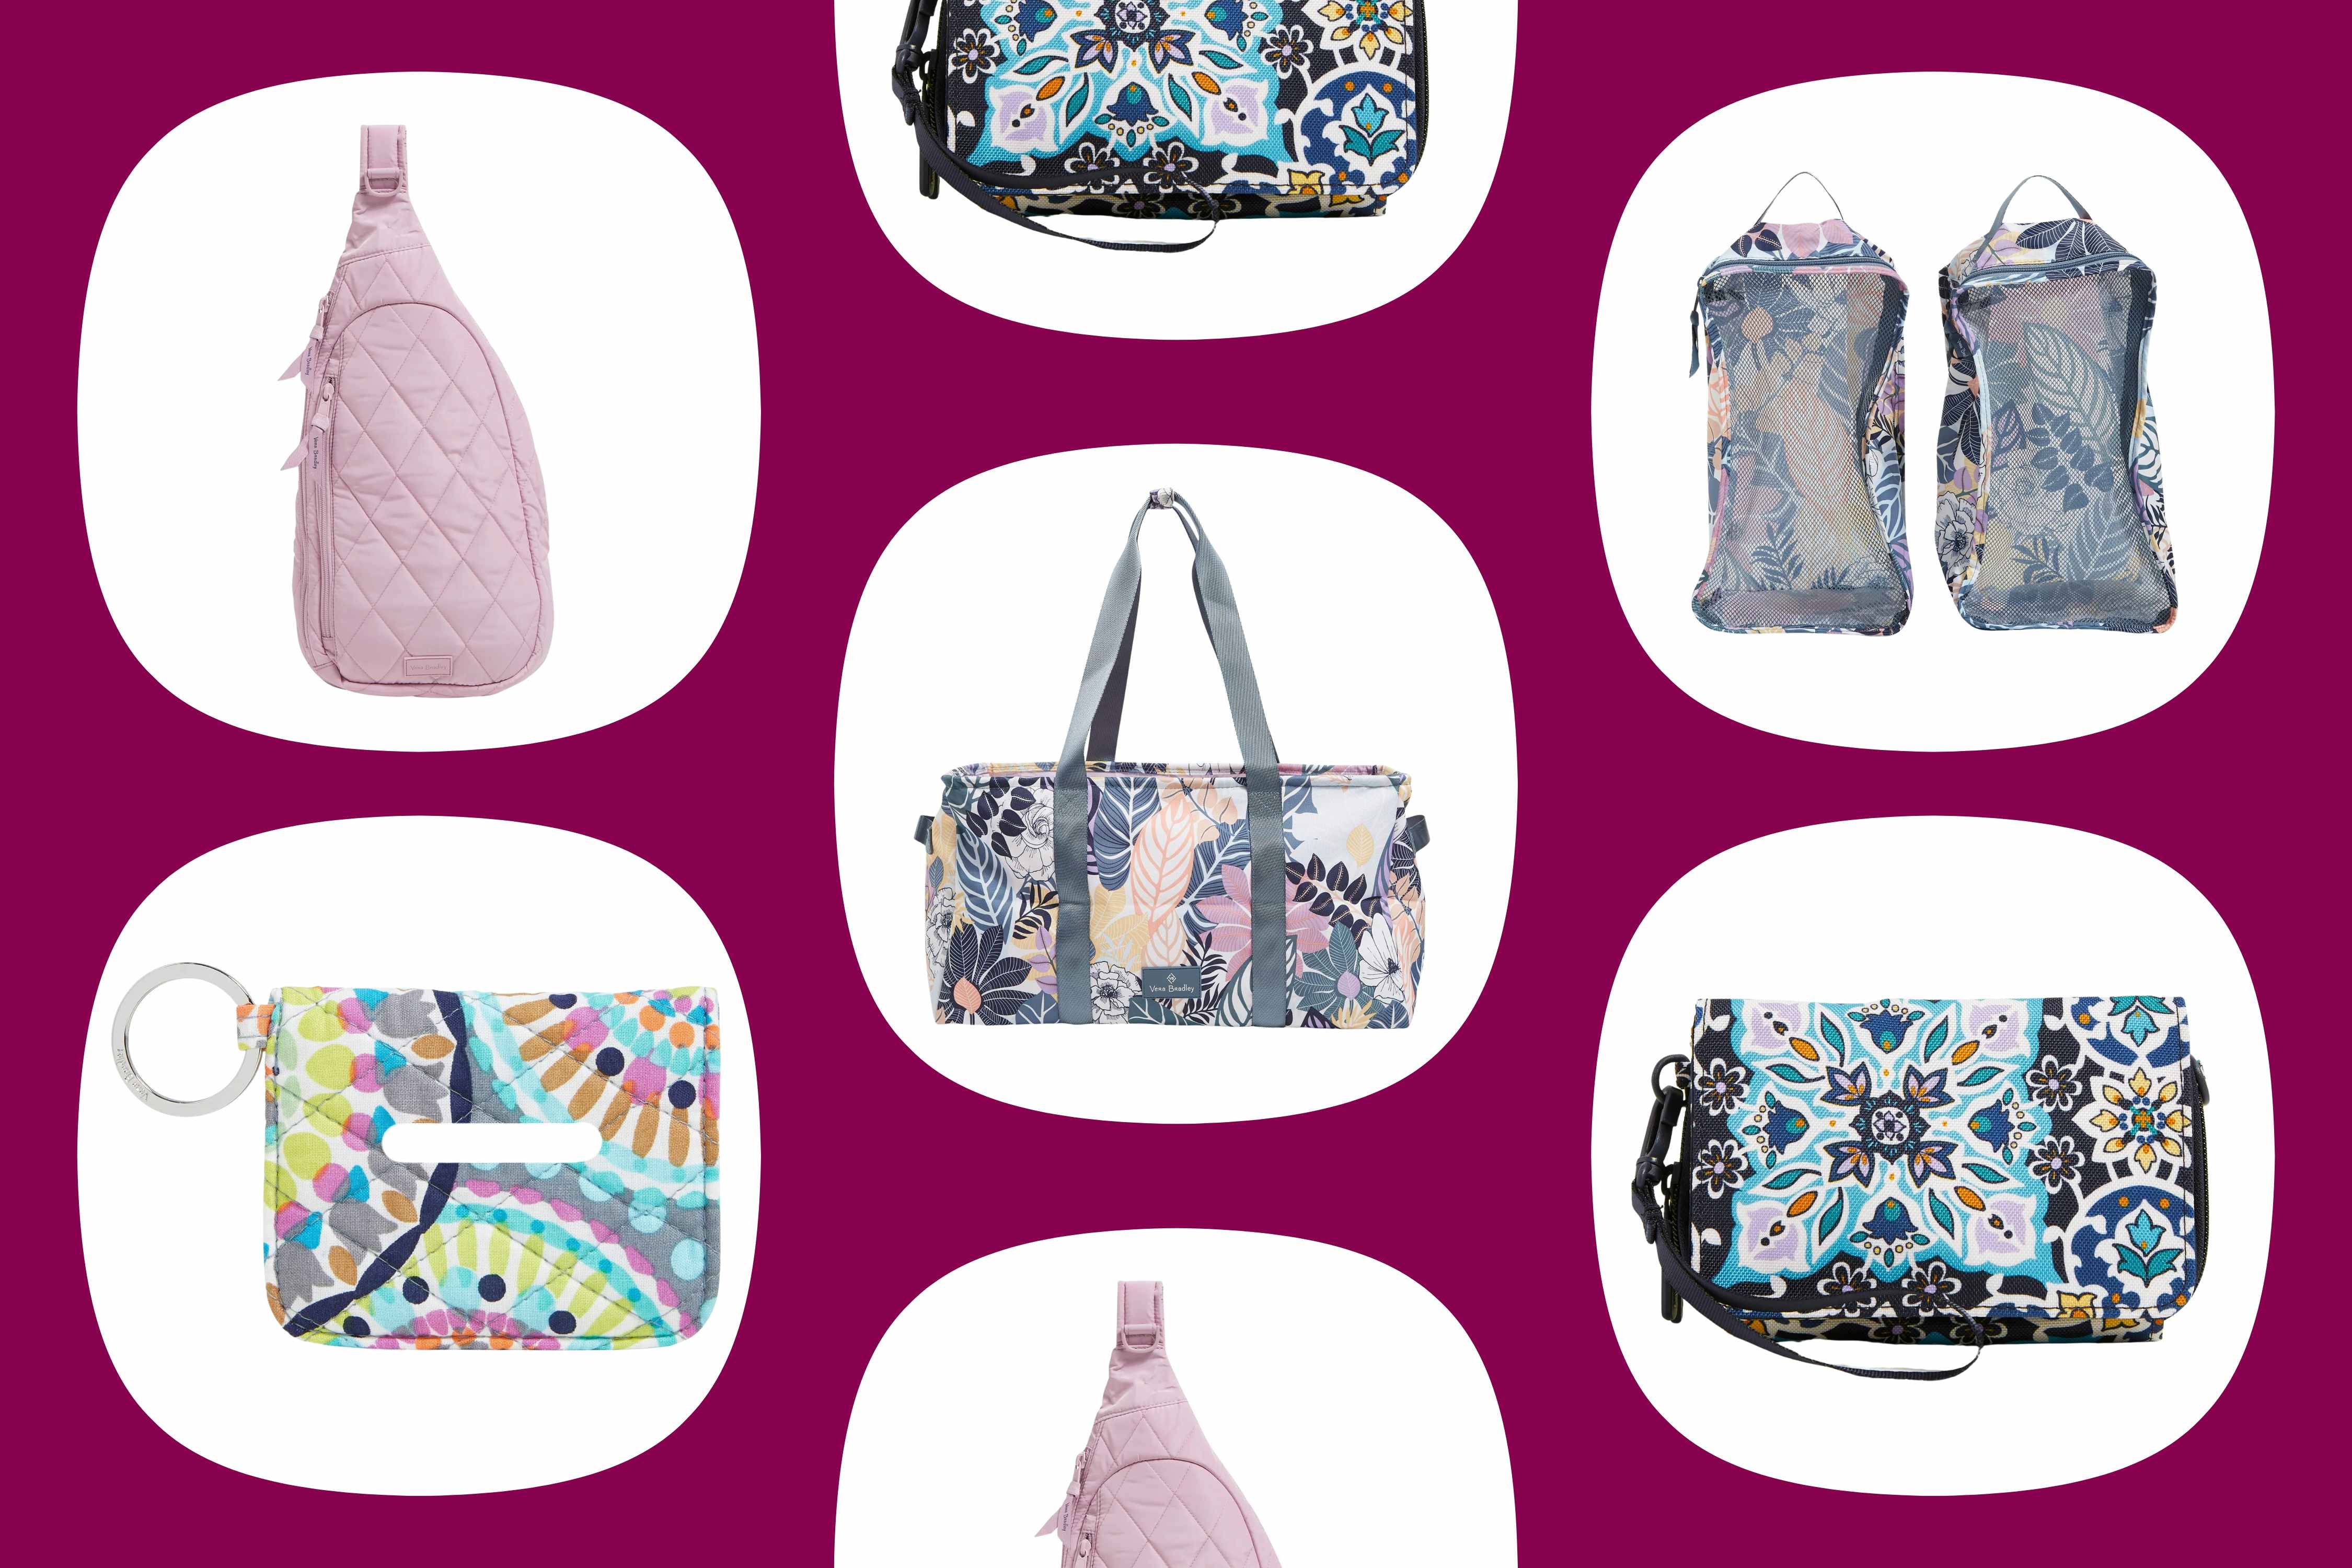 Vera Bradley at Shop Premium Outlets: $26 Crossbody, $31 Tote, and More